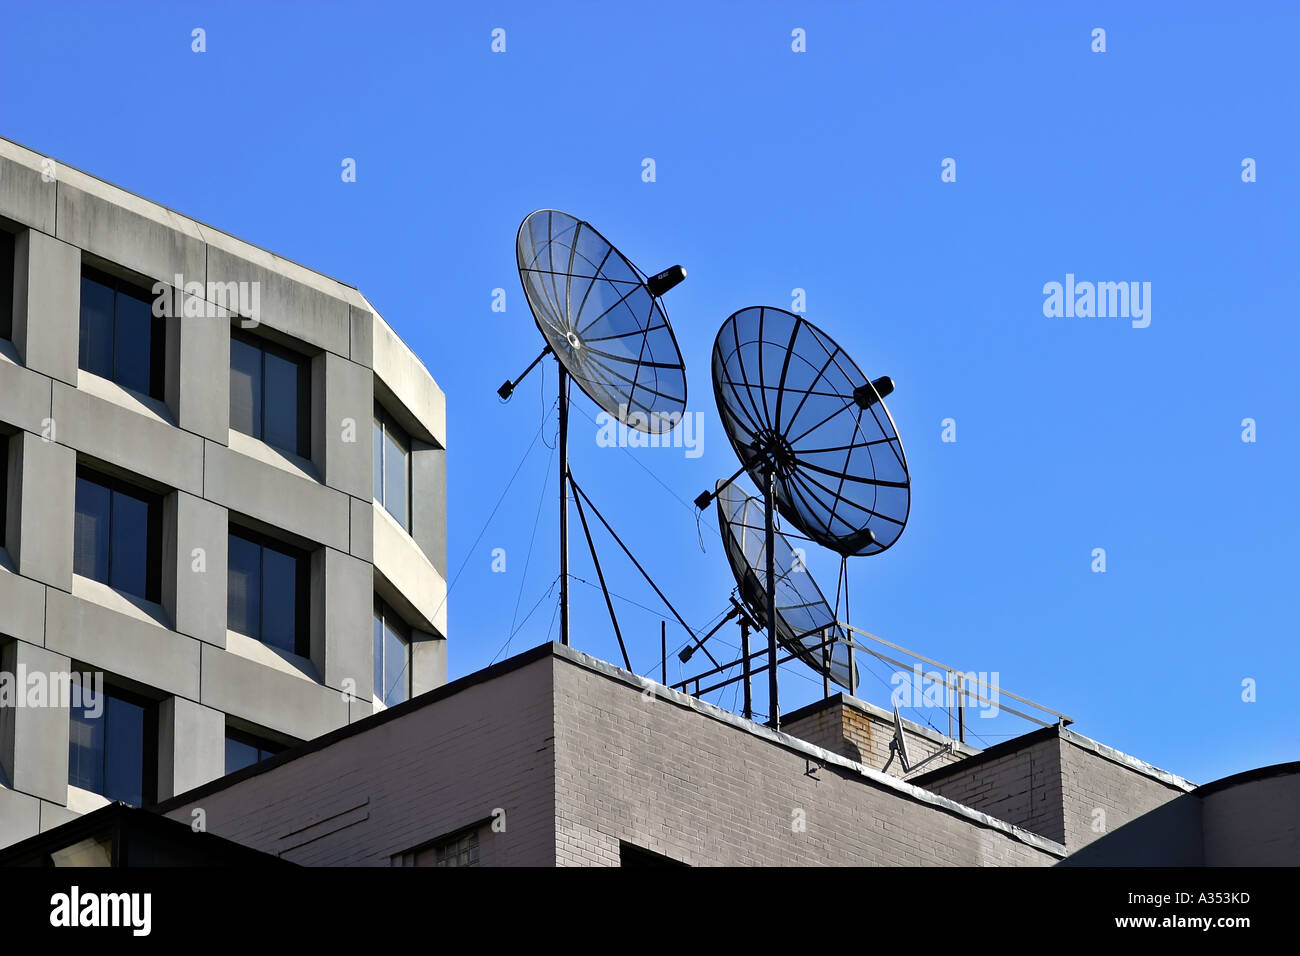 Satellites on a rooftop, against perfectly blue sky. Stock Photo